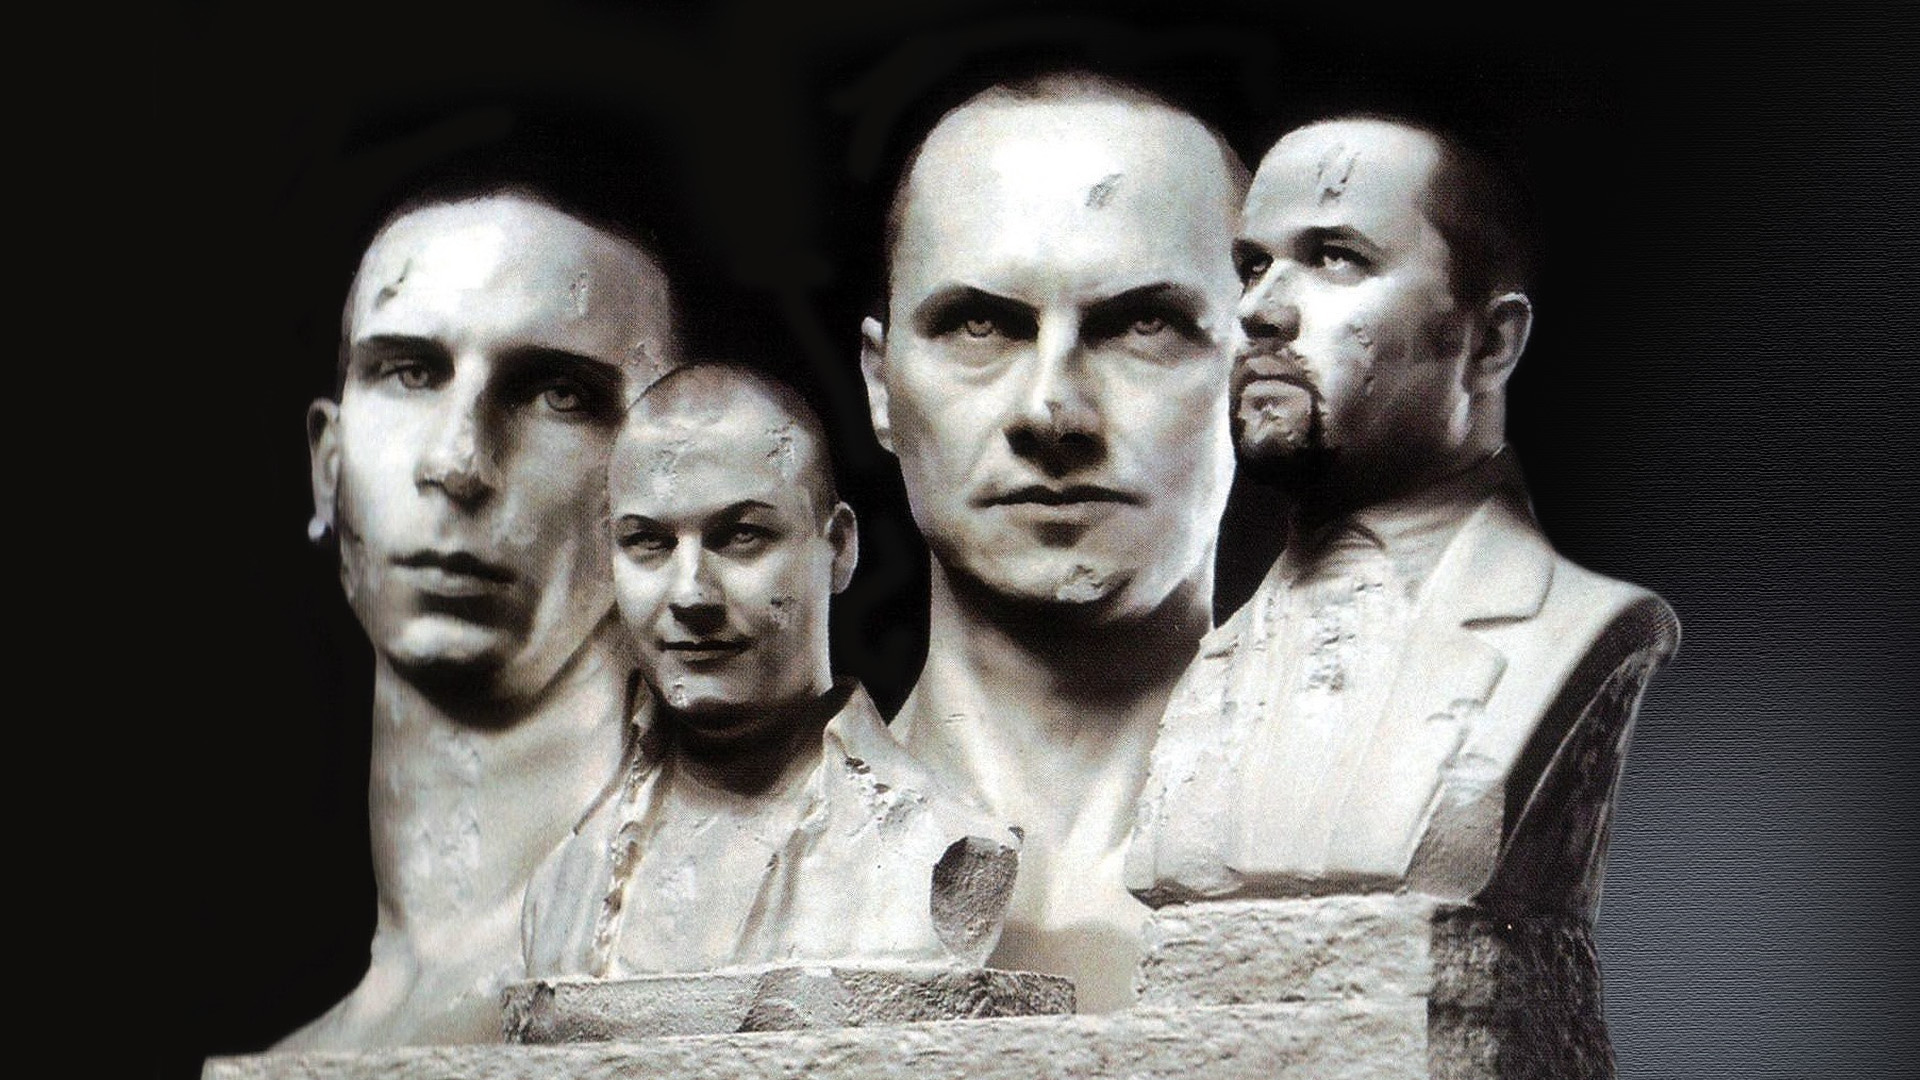 Clawfinger Wallpapers